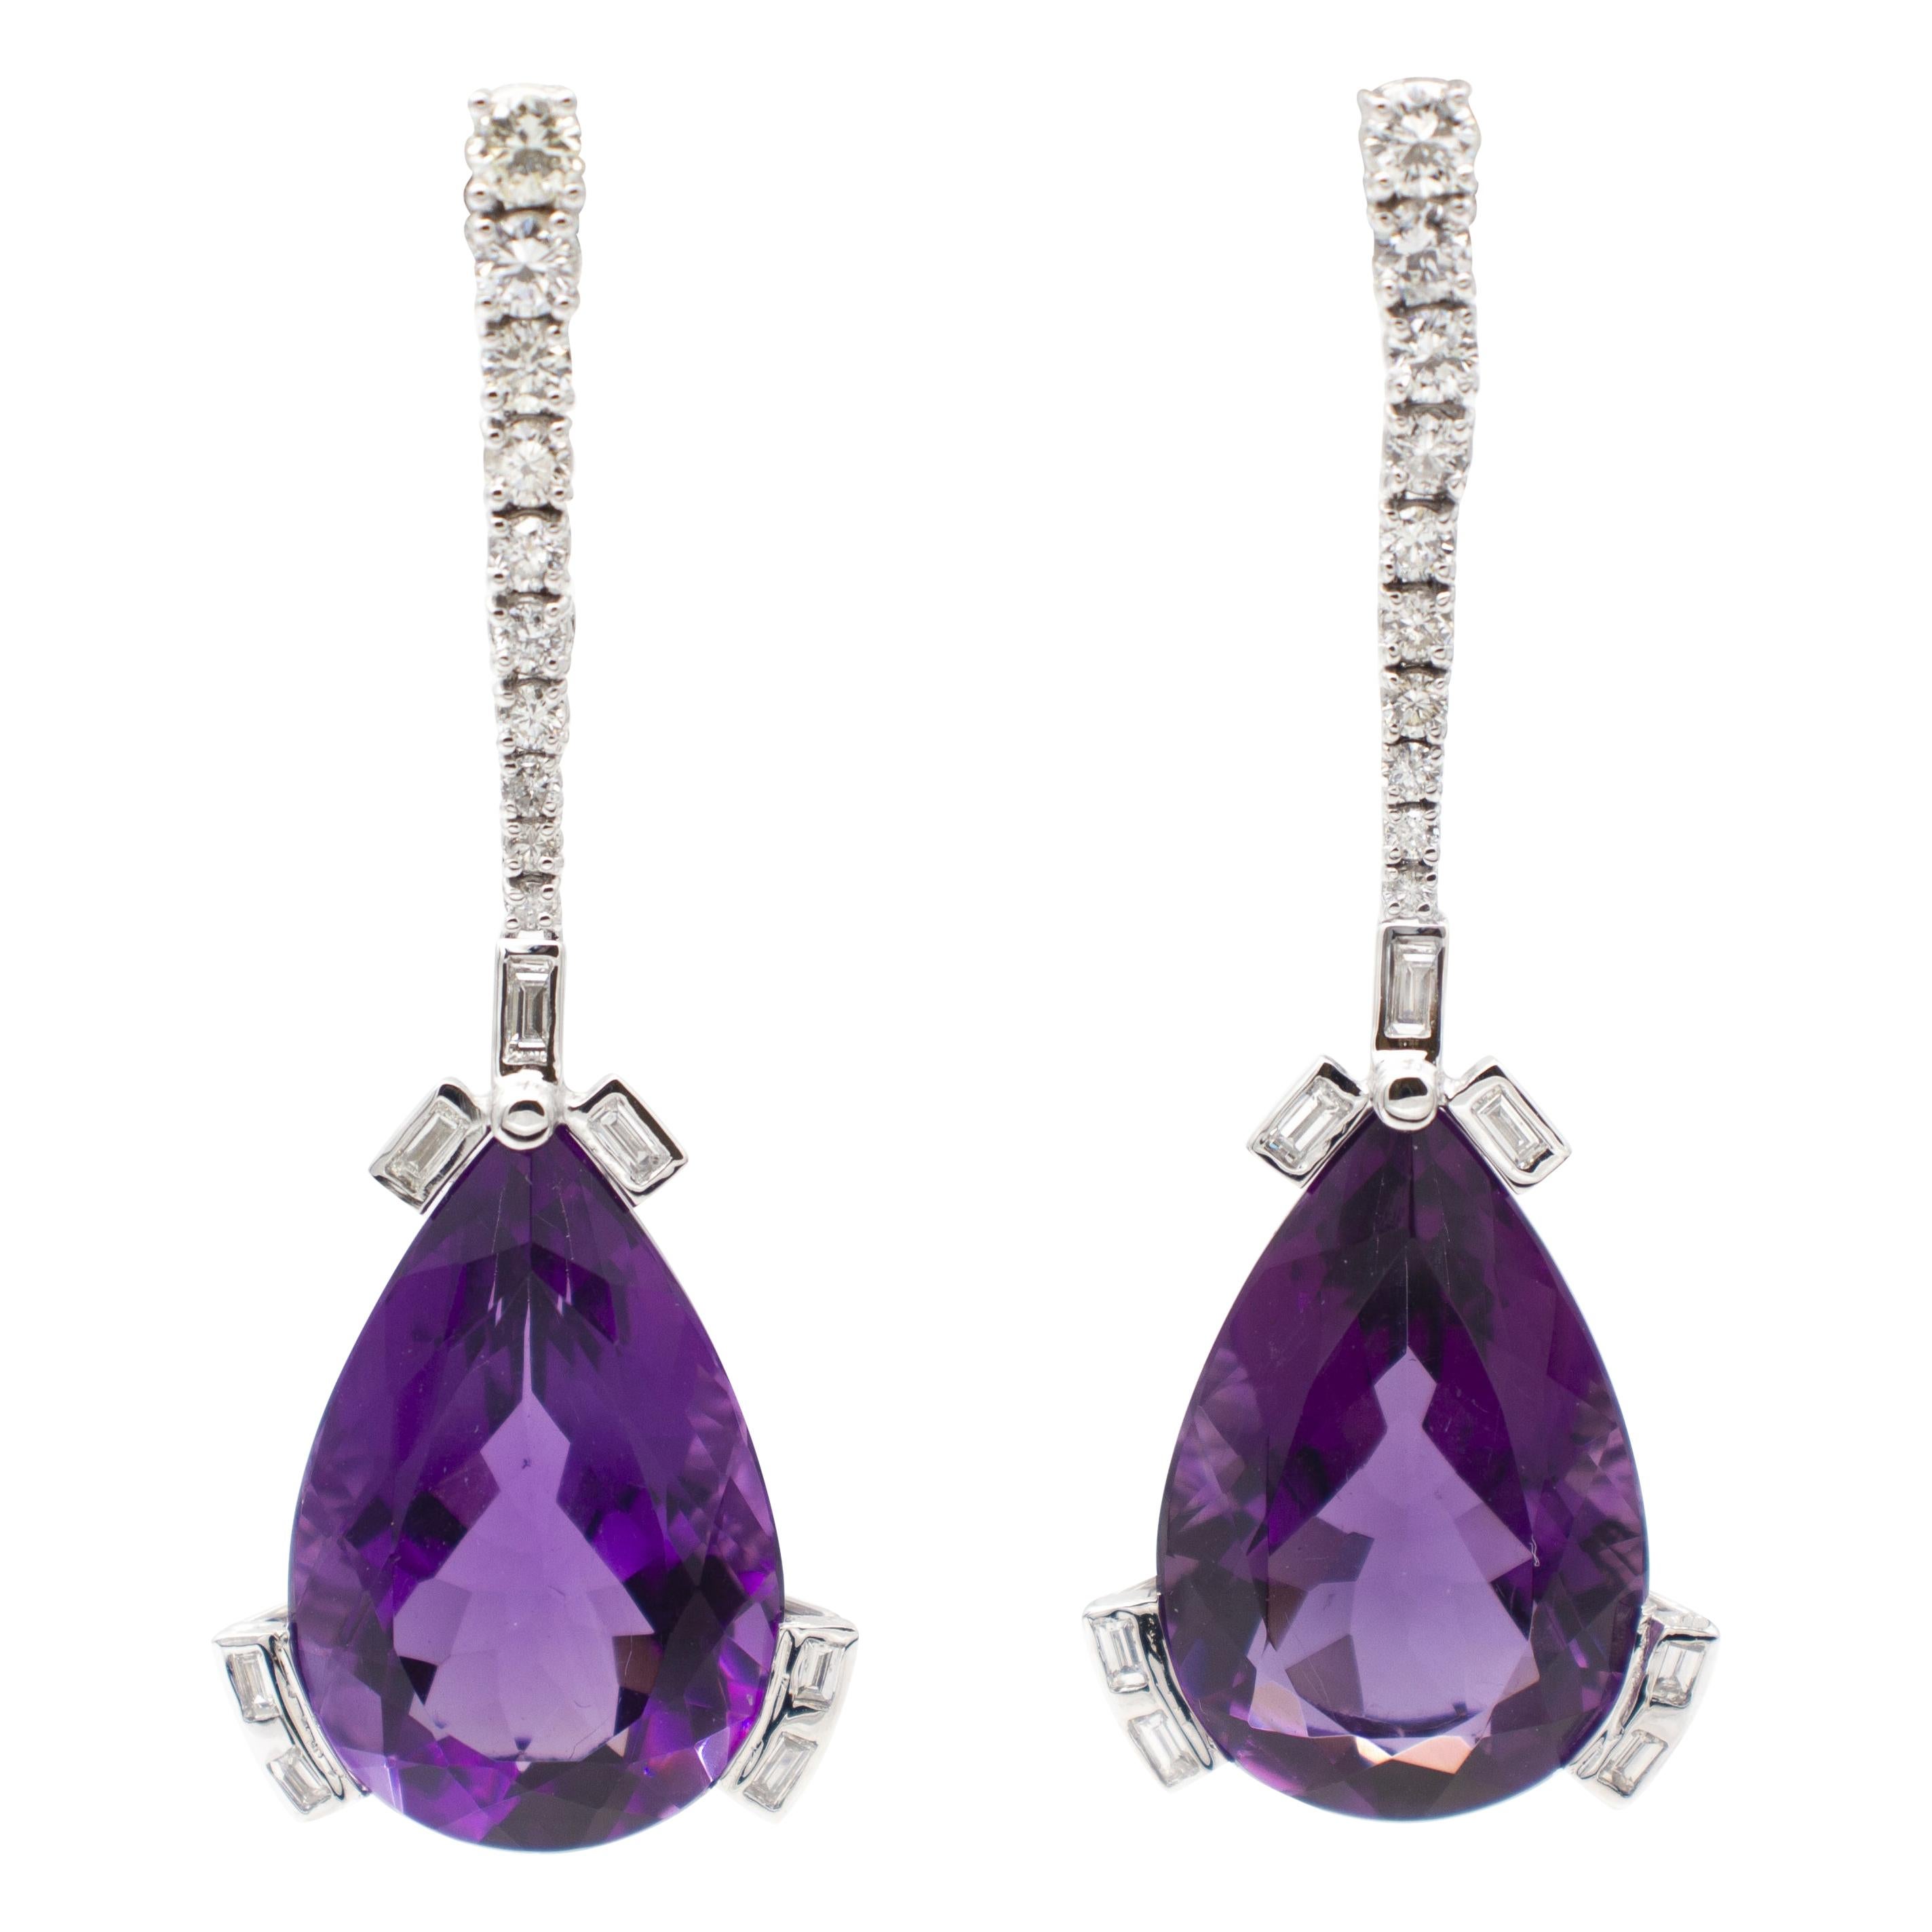 28 ct Drops Amethyst, Round and Emerald Cut Diamonds, 18kt White Gold Earrings For Sale